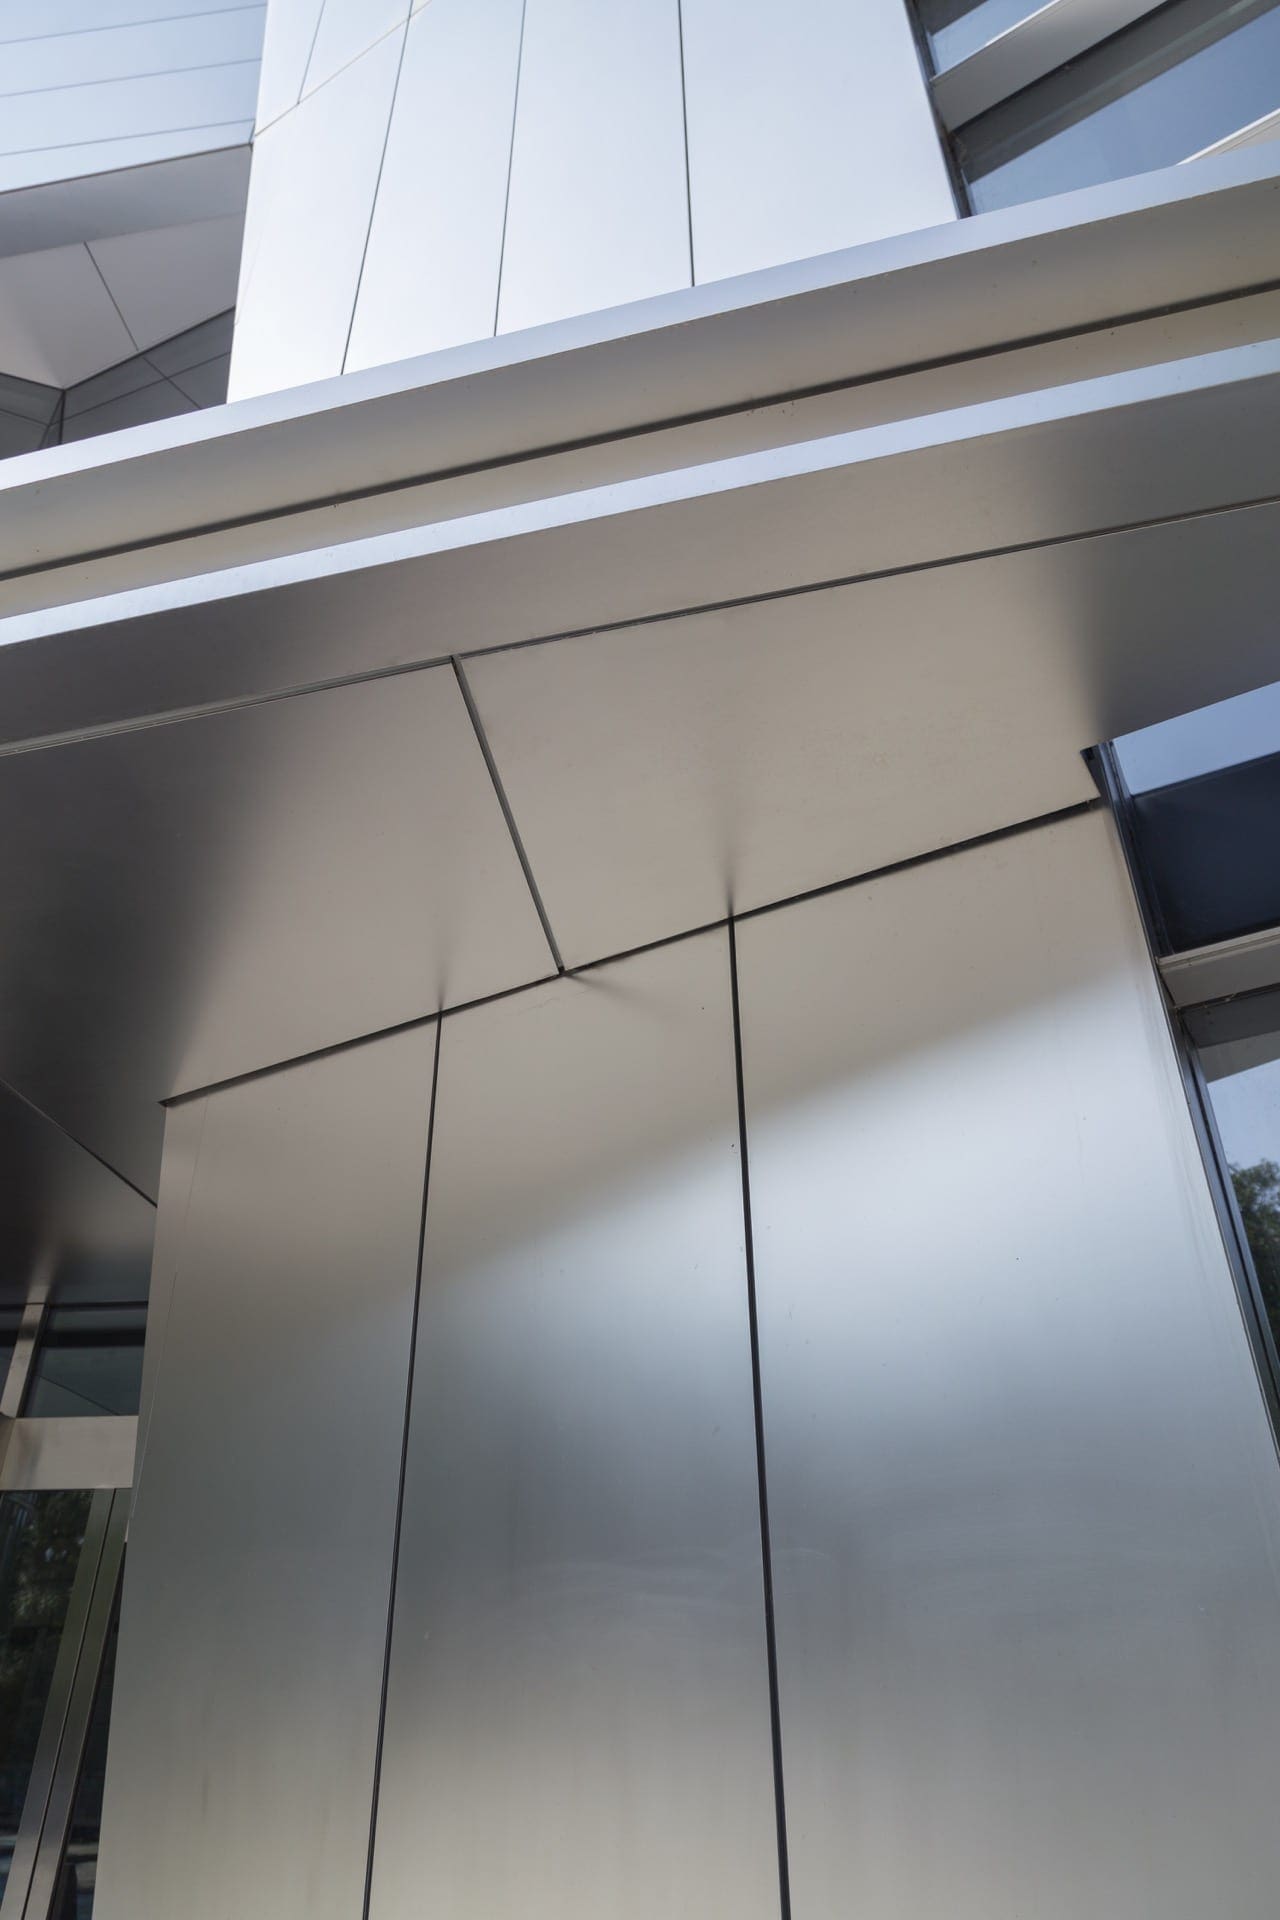 Stainless steel plate panel system developed by Zahner for IBM Headquarters.